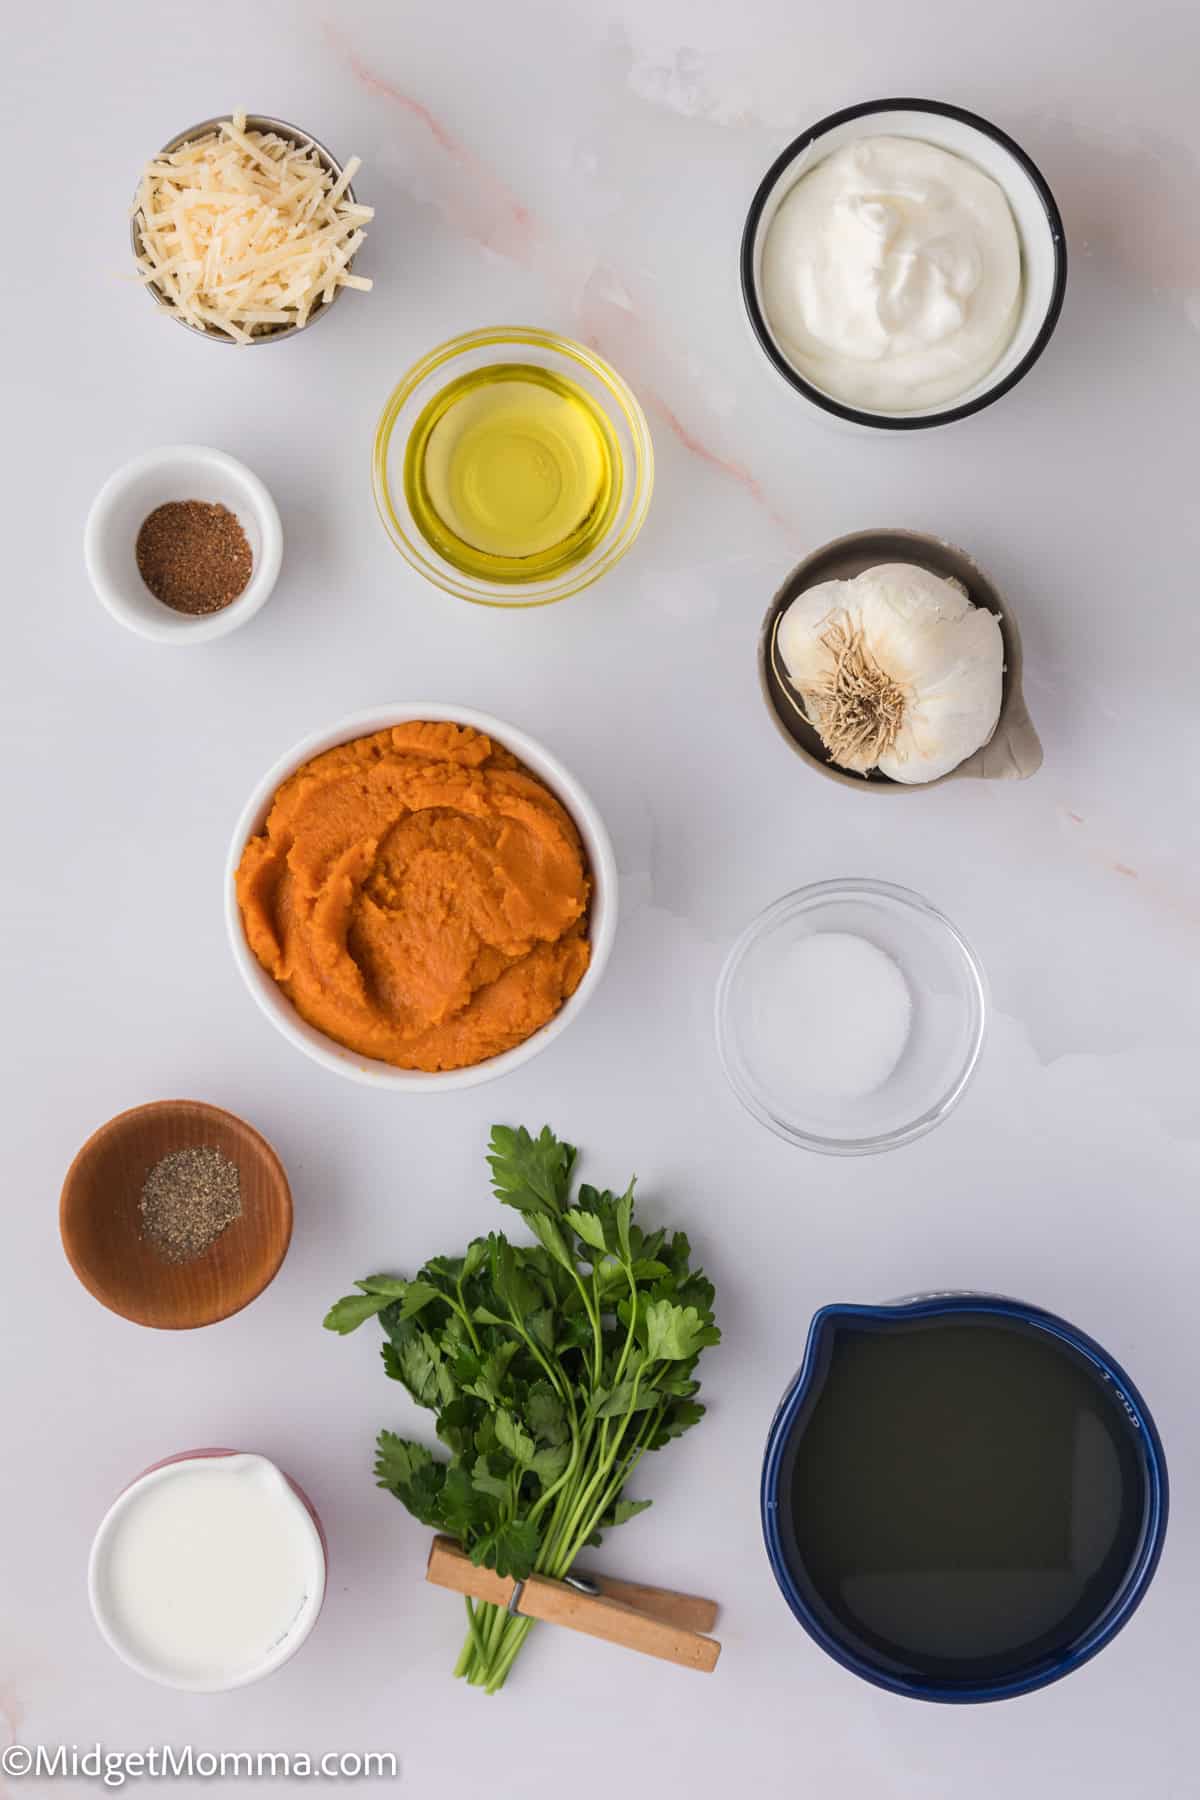 Pumpkin Pasta Sauce Recipe Ingredients. Various cooking ingredients arranged on a white surface, including bowls of spices, oils, dairy products, and fresh herbs.